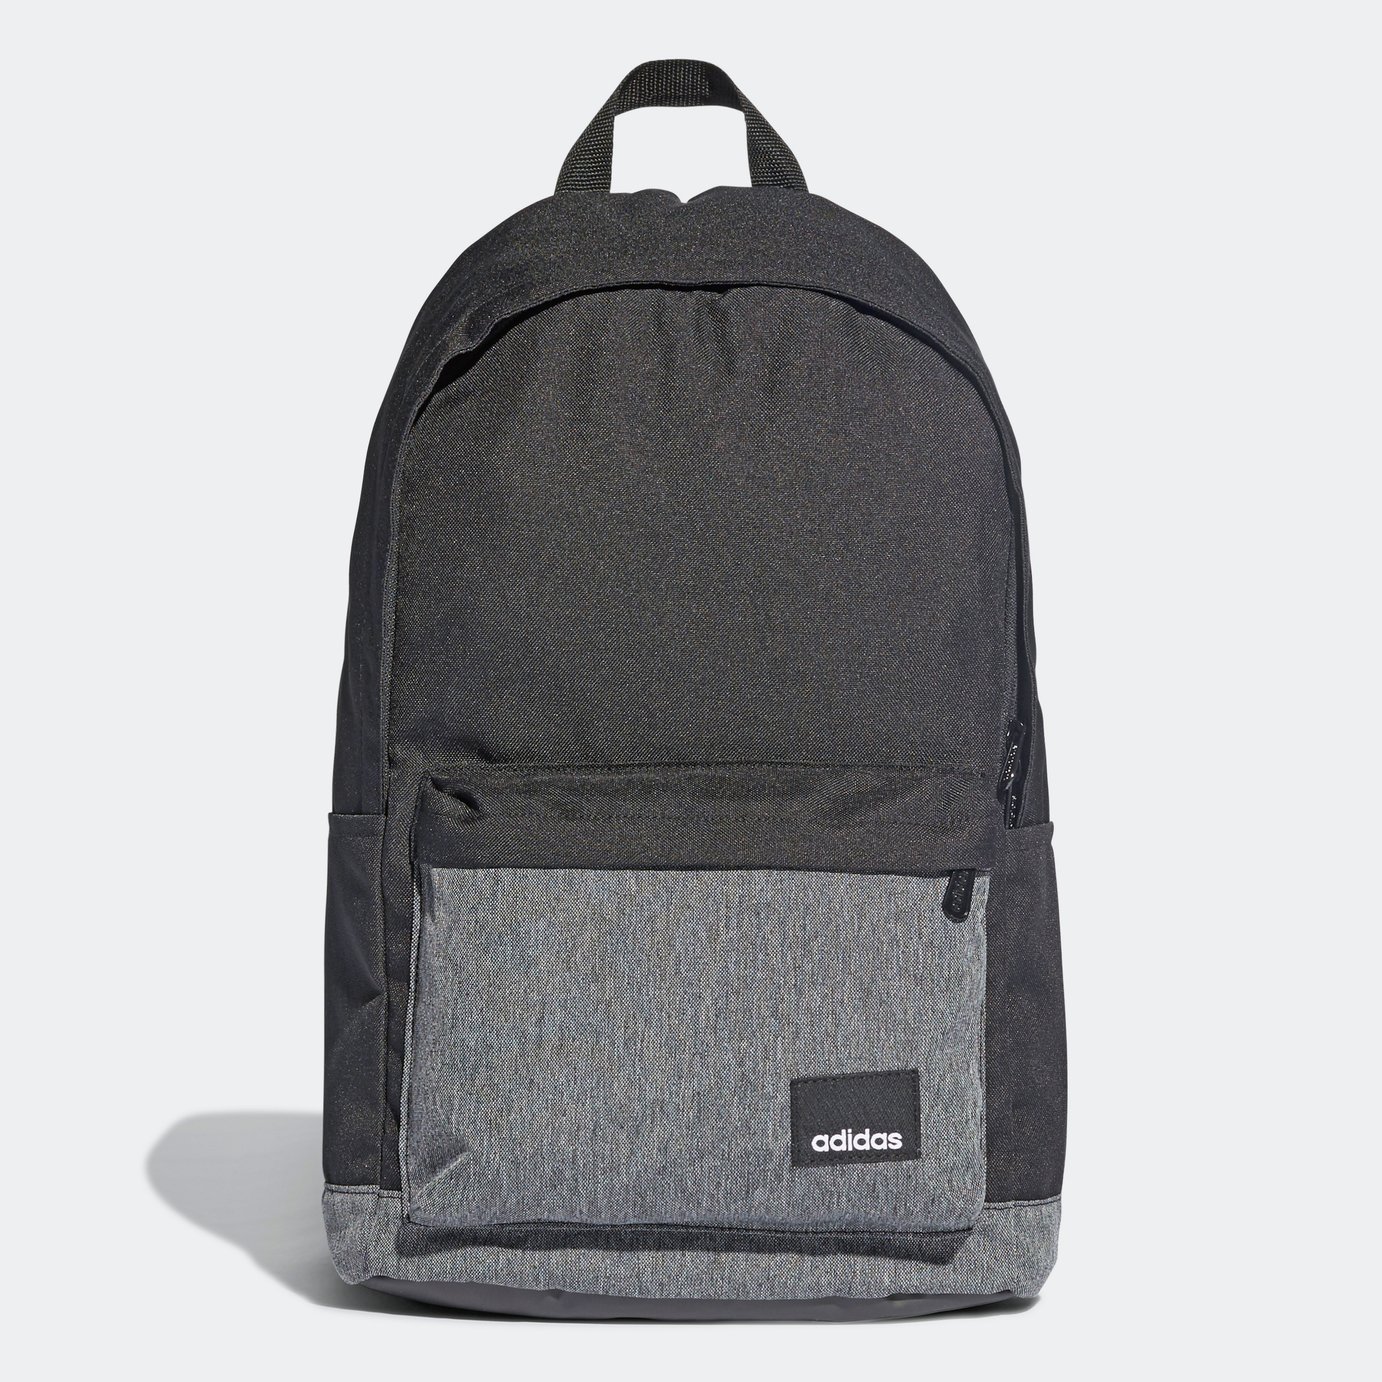 Adidas Linear Classic 24L Backpack - Black and White